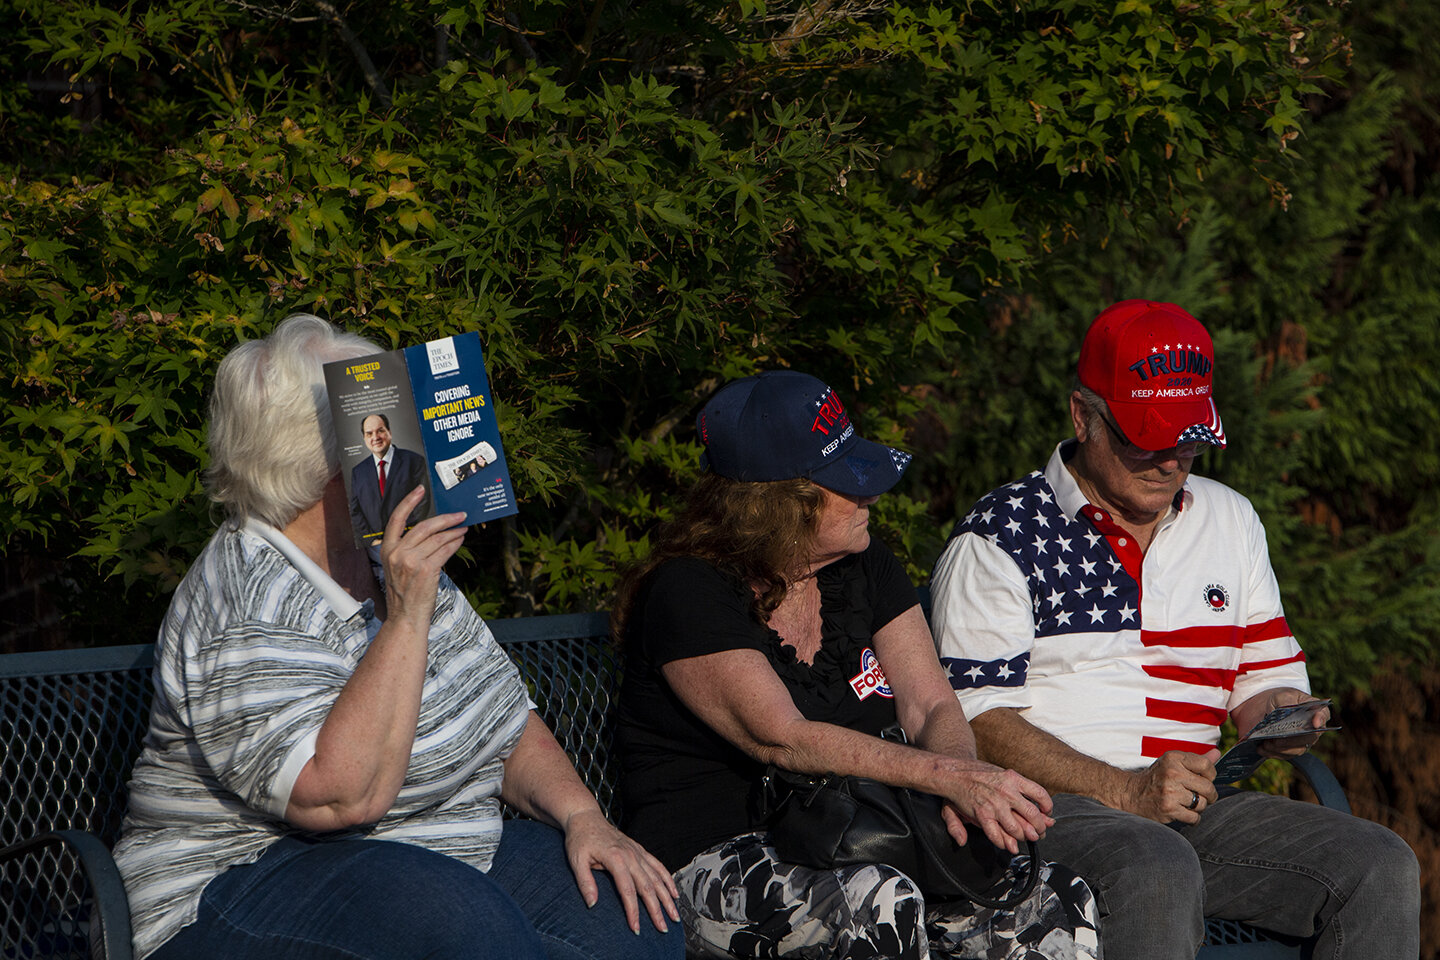  Trump supporters gather at a campaign rally for NC 9th Congressional District candidate Dan Bishop on September 9, 2019 in Fayetteville, North Carolina.  